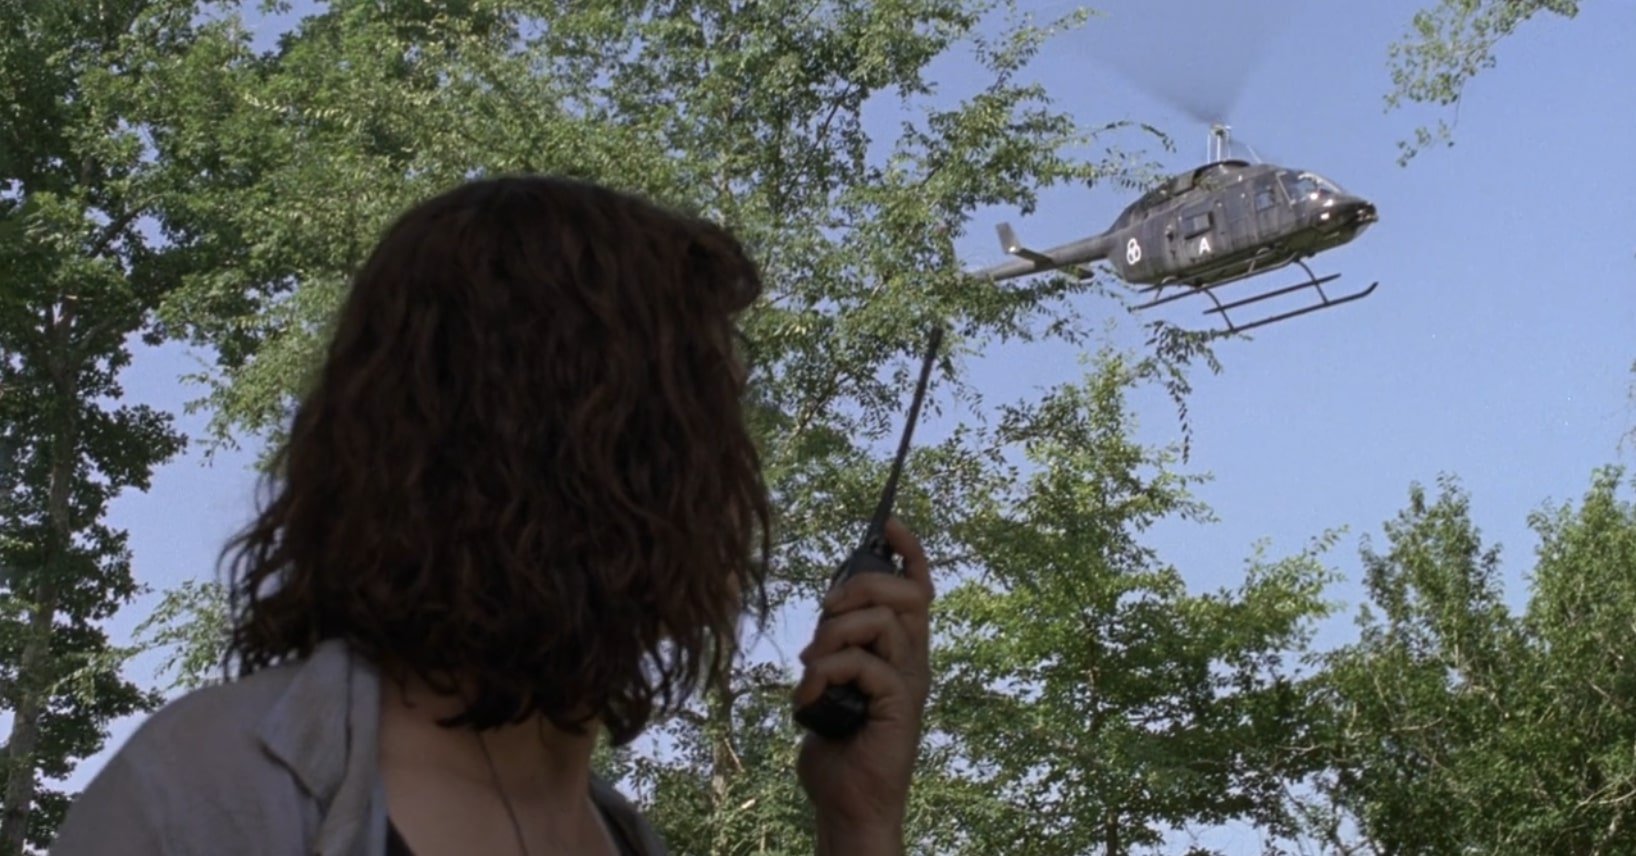 In season 9 episode 5, Jadis convinces the helicopter to save Rick. The symbol on the chopper is attention-grabbing.